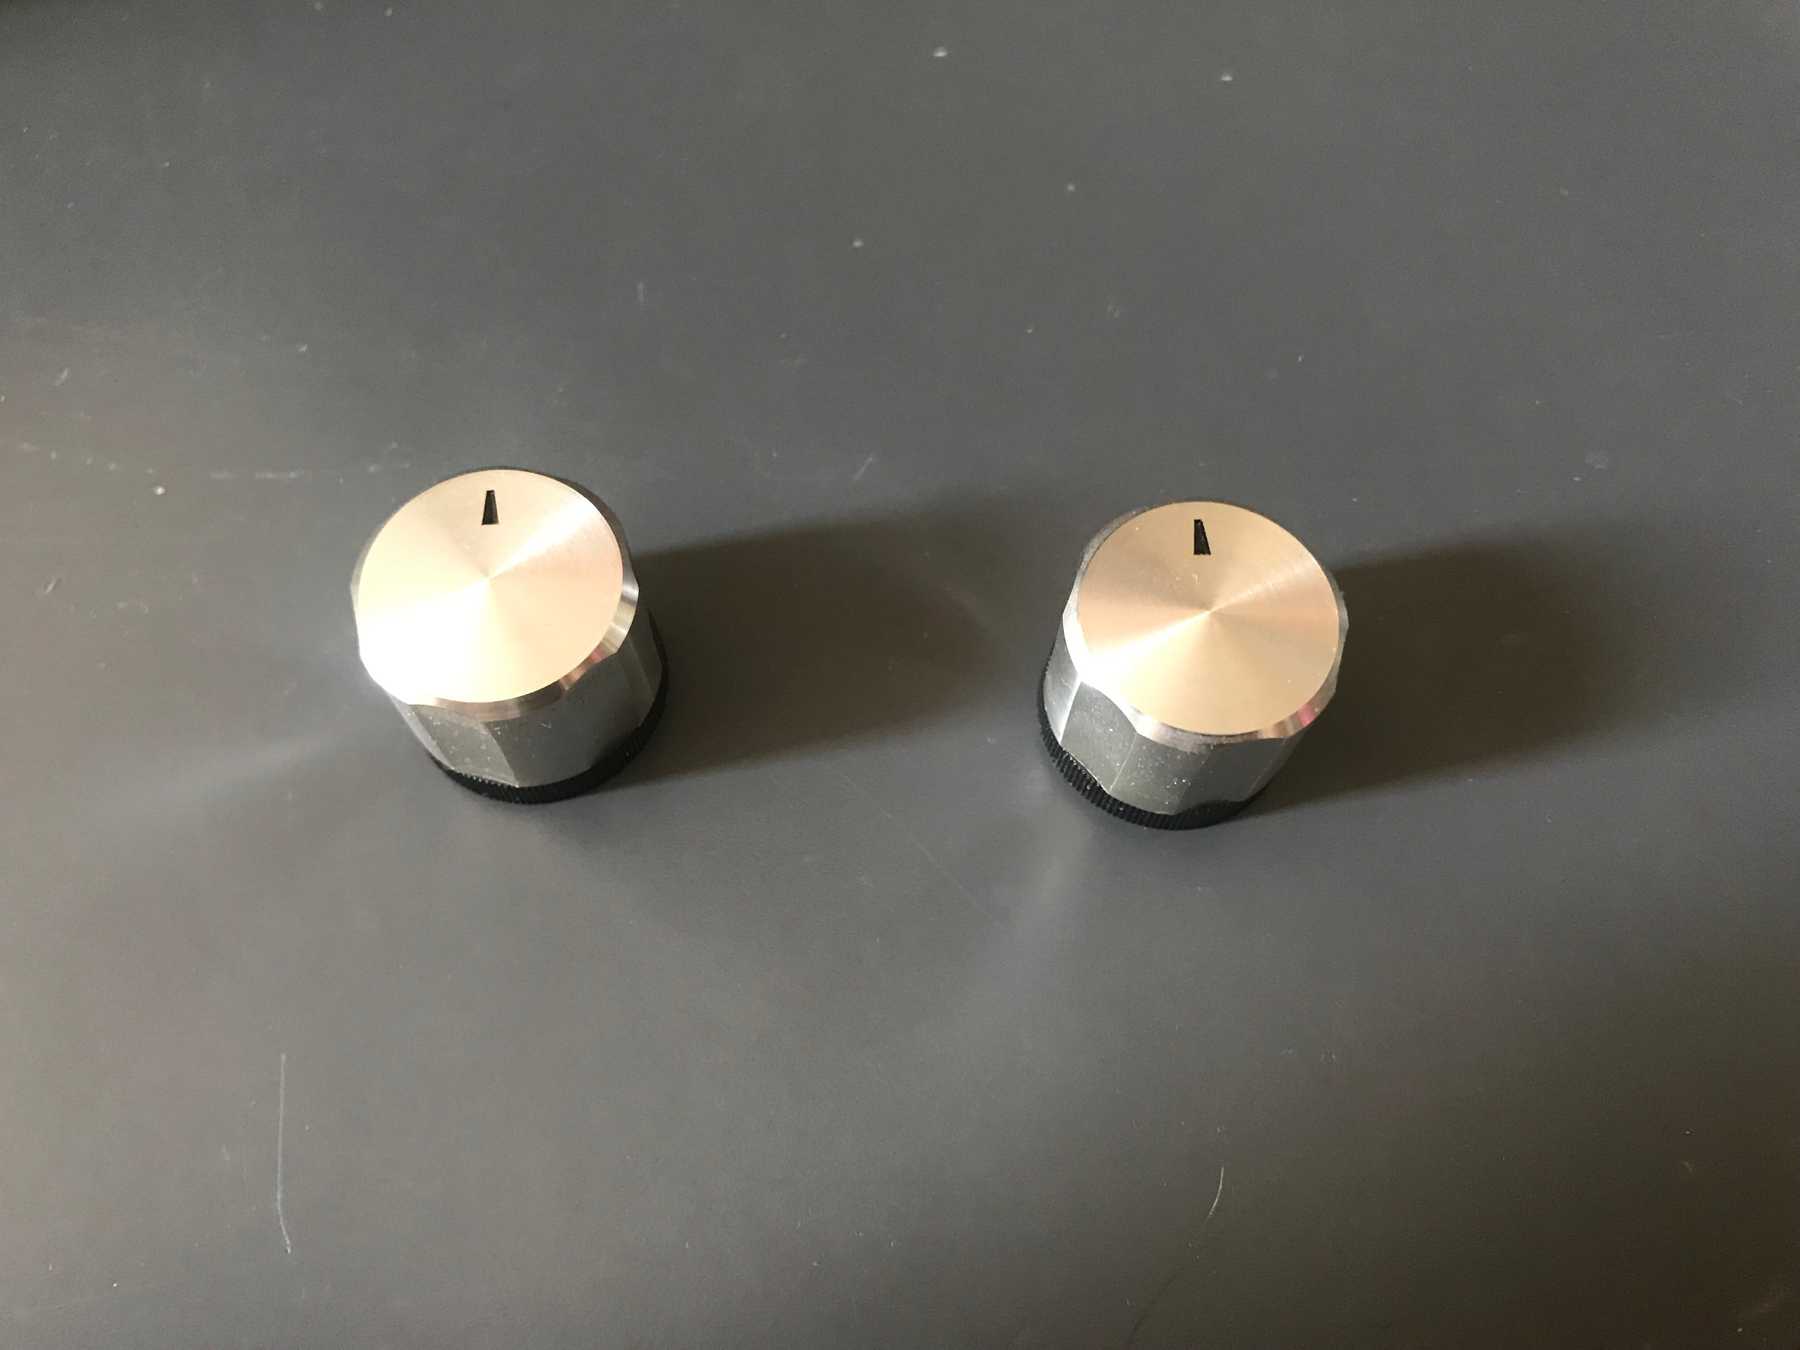 Two knobs pilfered from my stereo